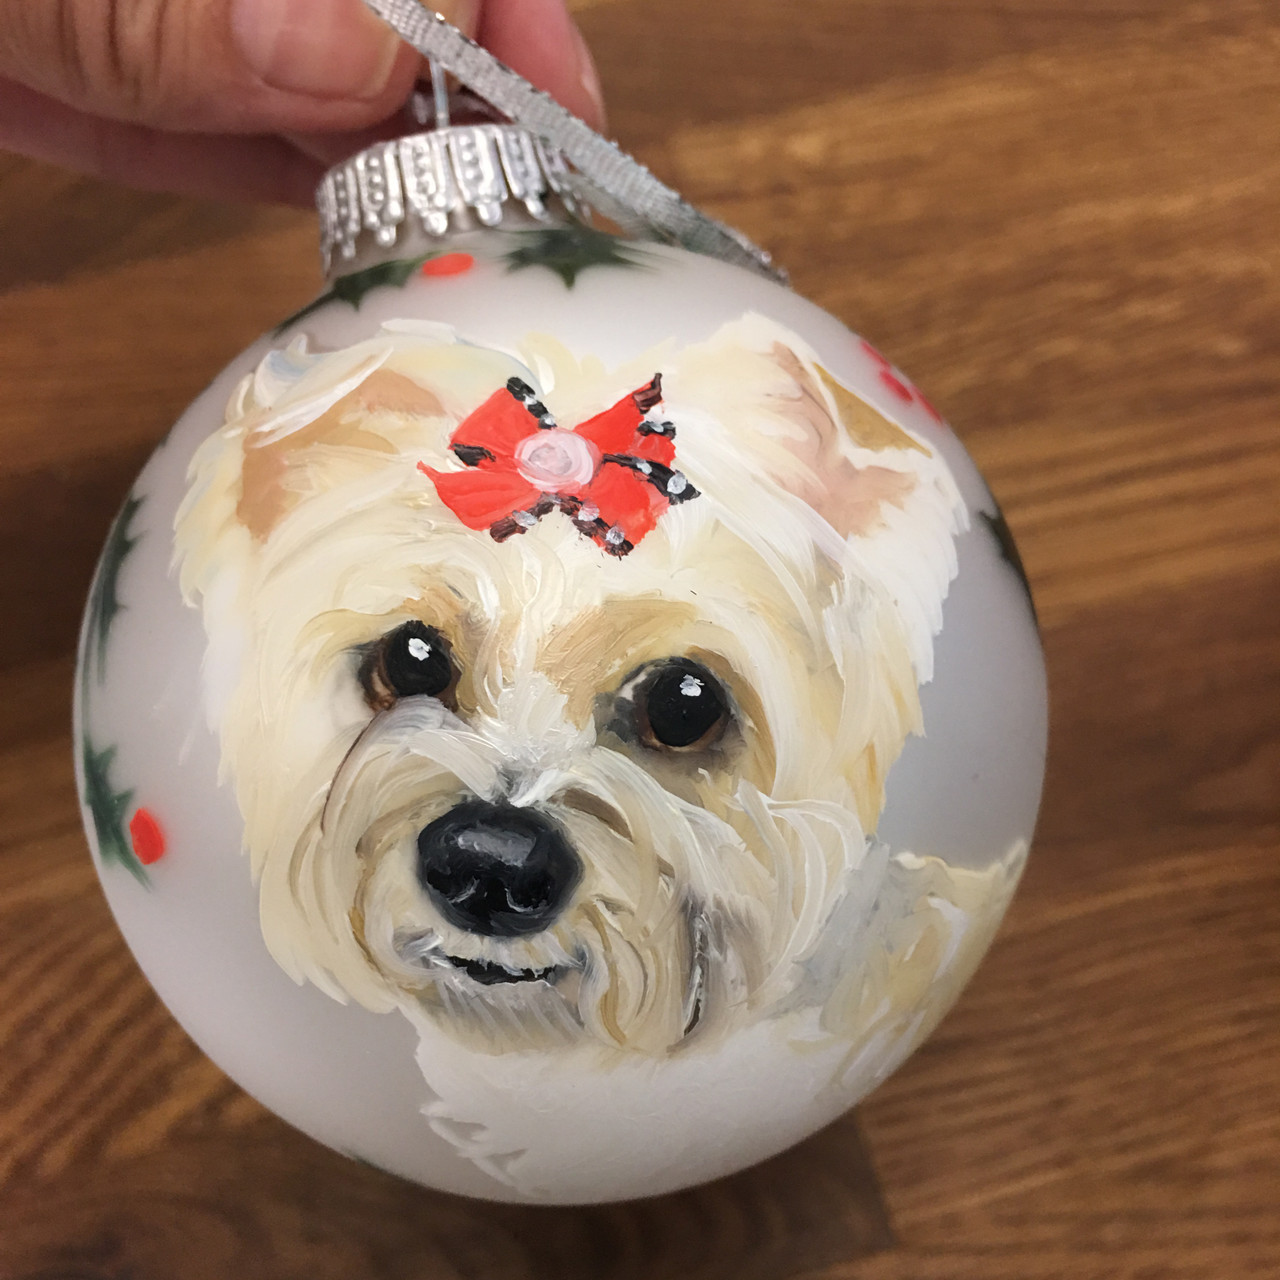 https://cdn11.bigcommerce.com/s-53033/images/stencil/1280x1280/products/4919/7310/yorkie_holiday_ball__80170.1594671530.jpg?c=2